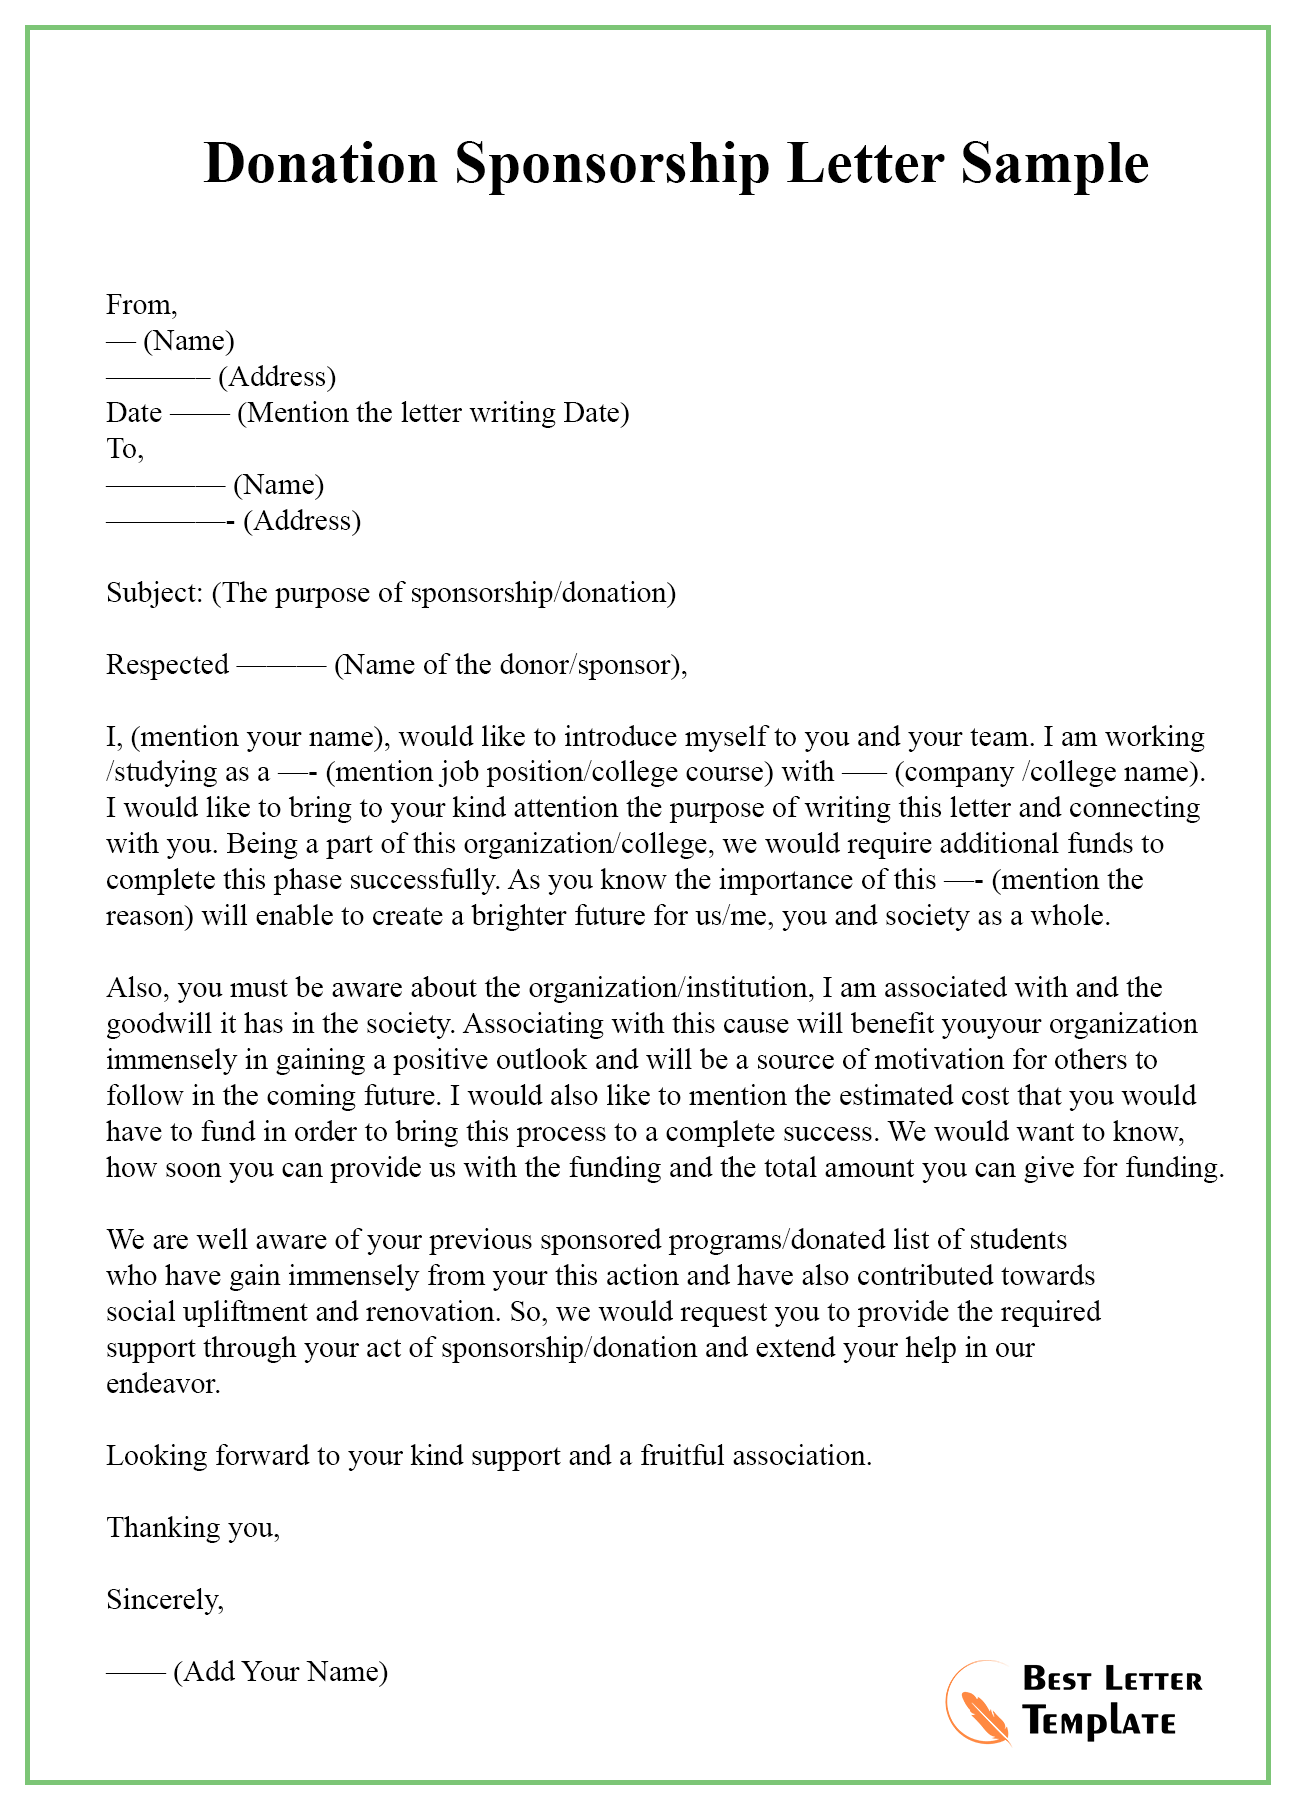 how to write a letter asking for funding